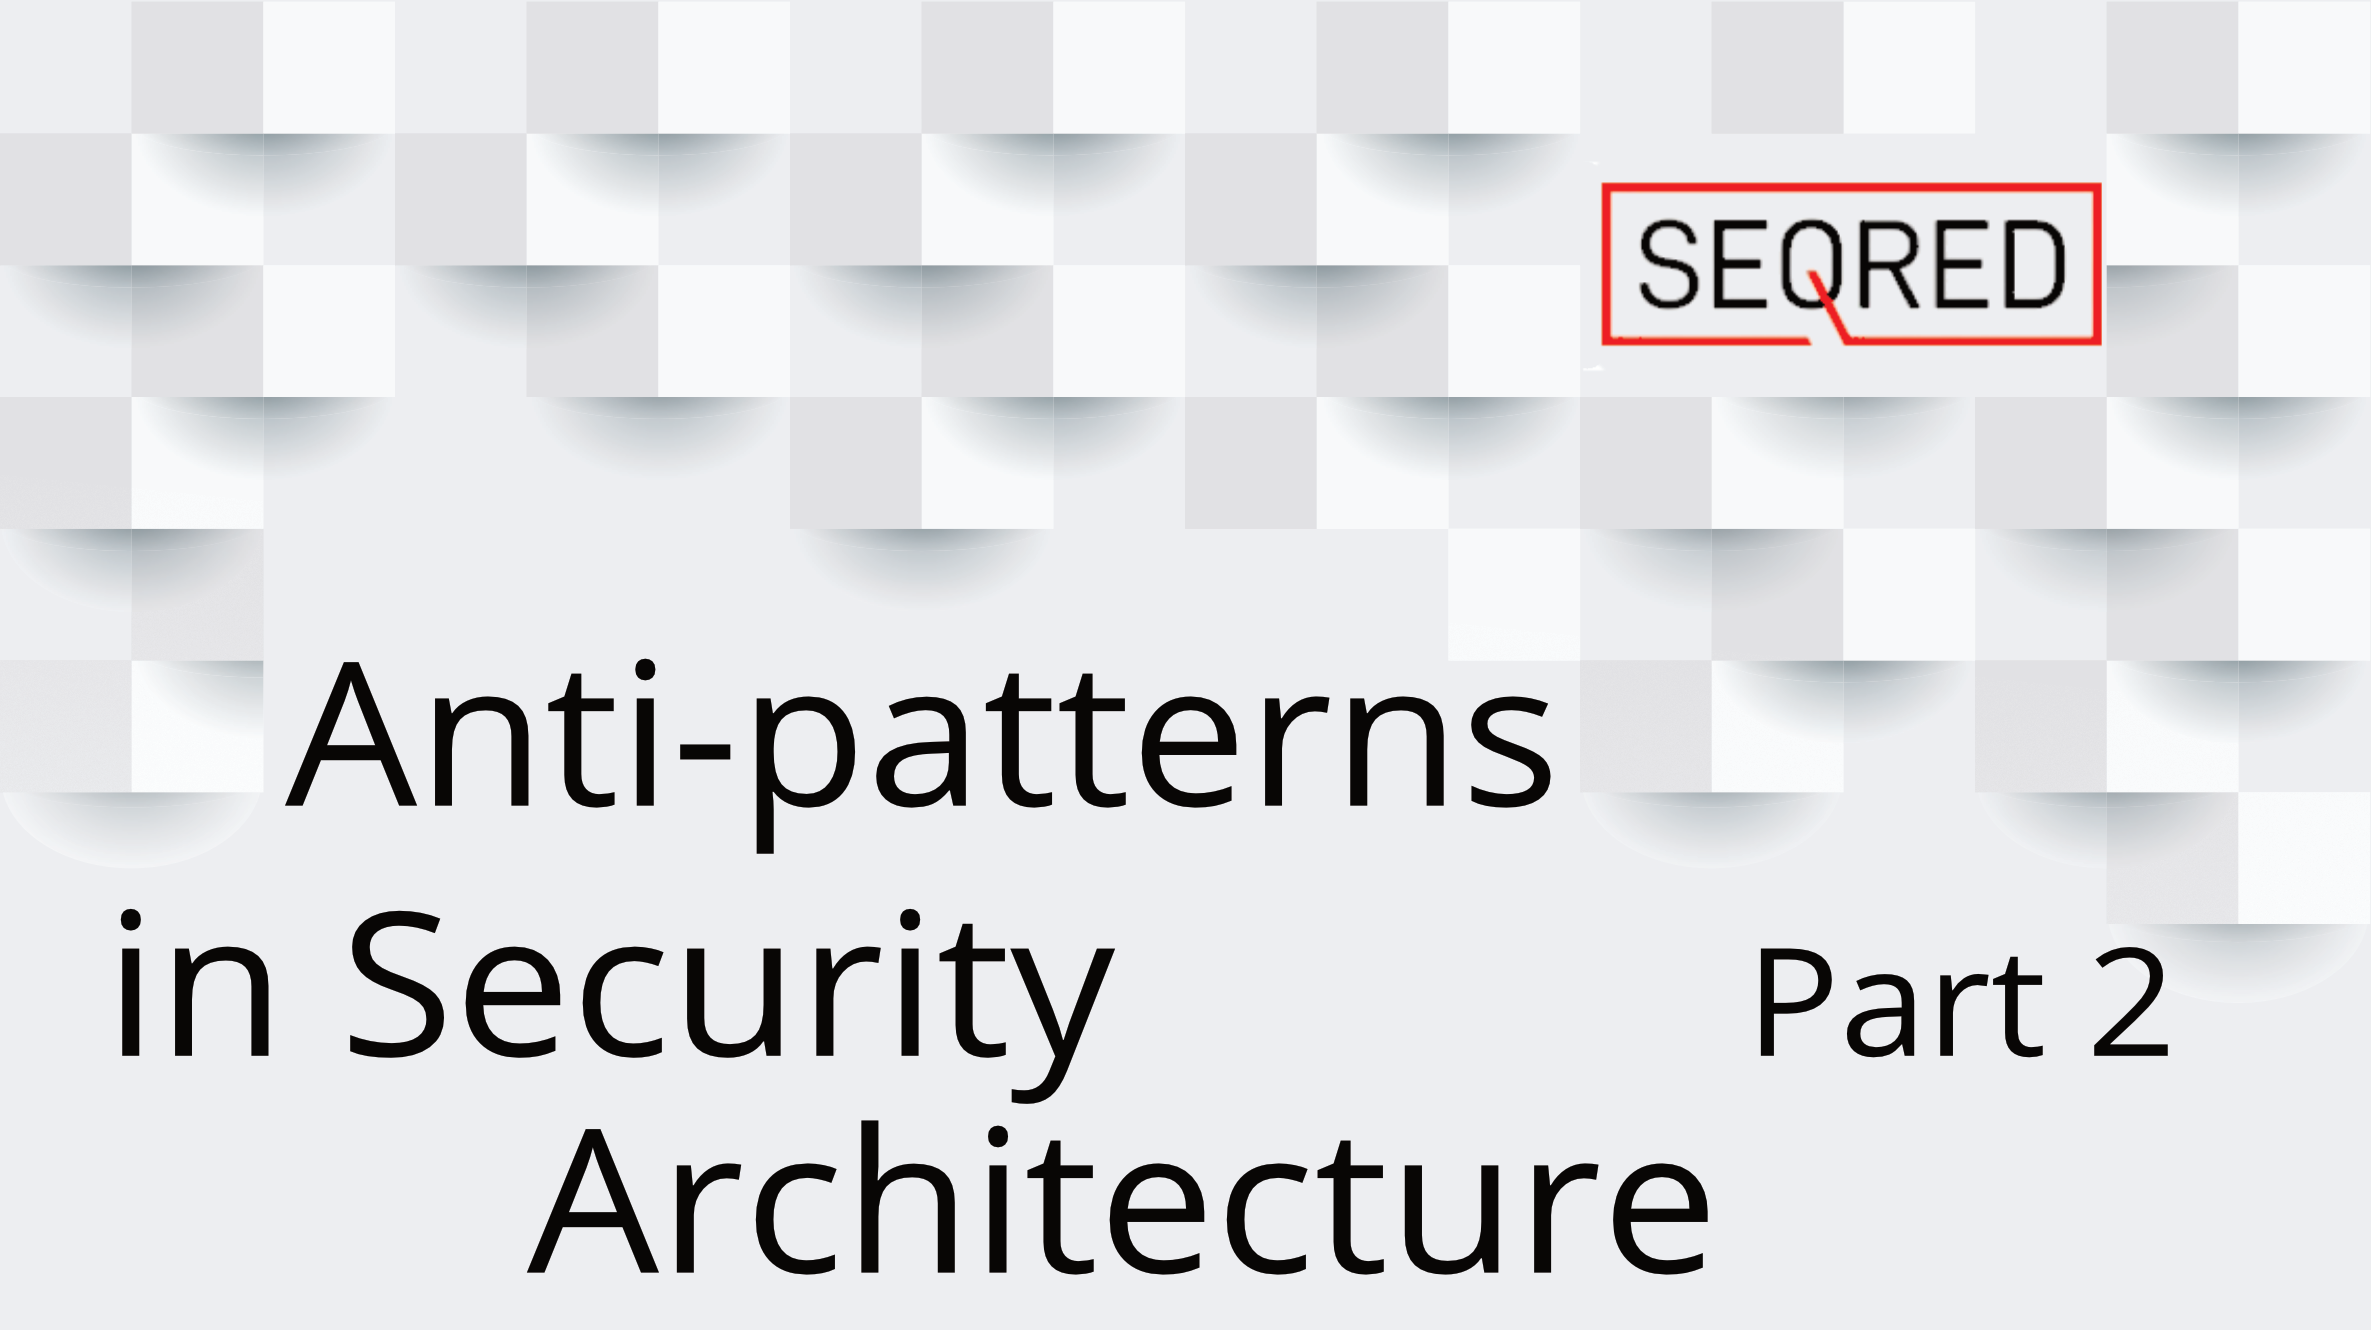 Anti-patterns in security architecture